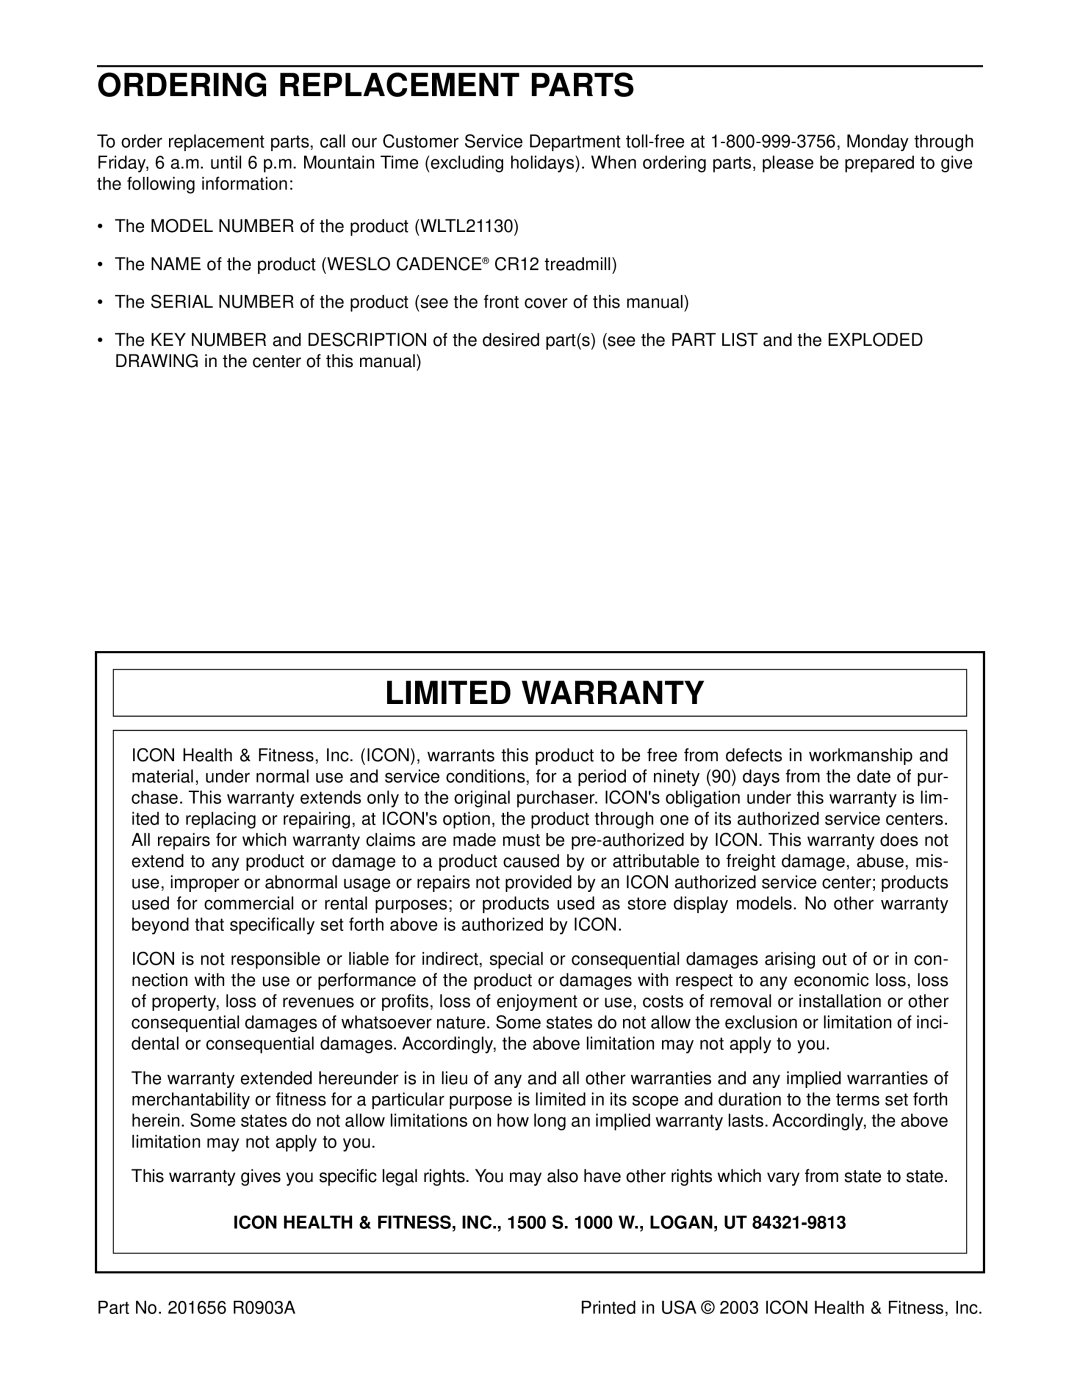 Weslo WLTL21130 Ordering Replacement Parts, Limited Warranty, ICON HEALTH & FITNESS, INC., 1500 S. 1000 W., LOGAN, UT 